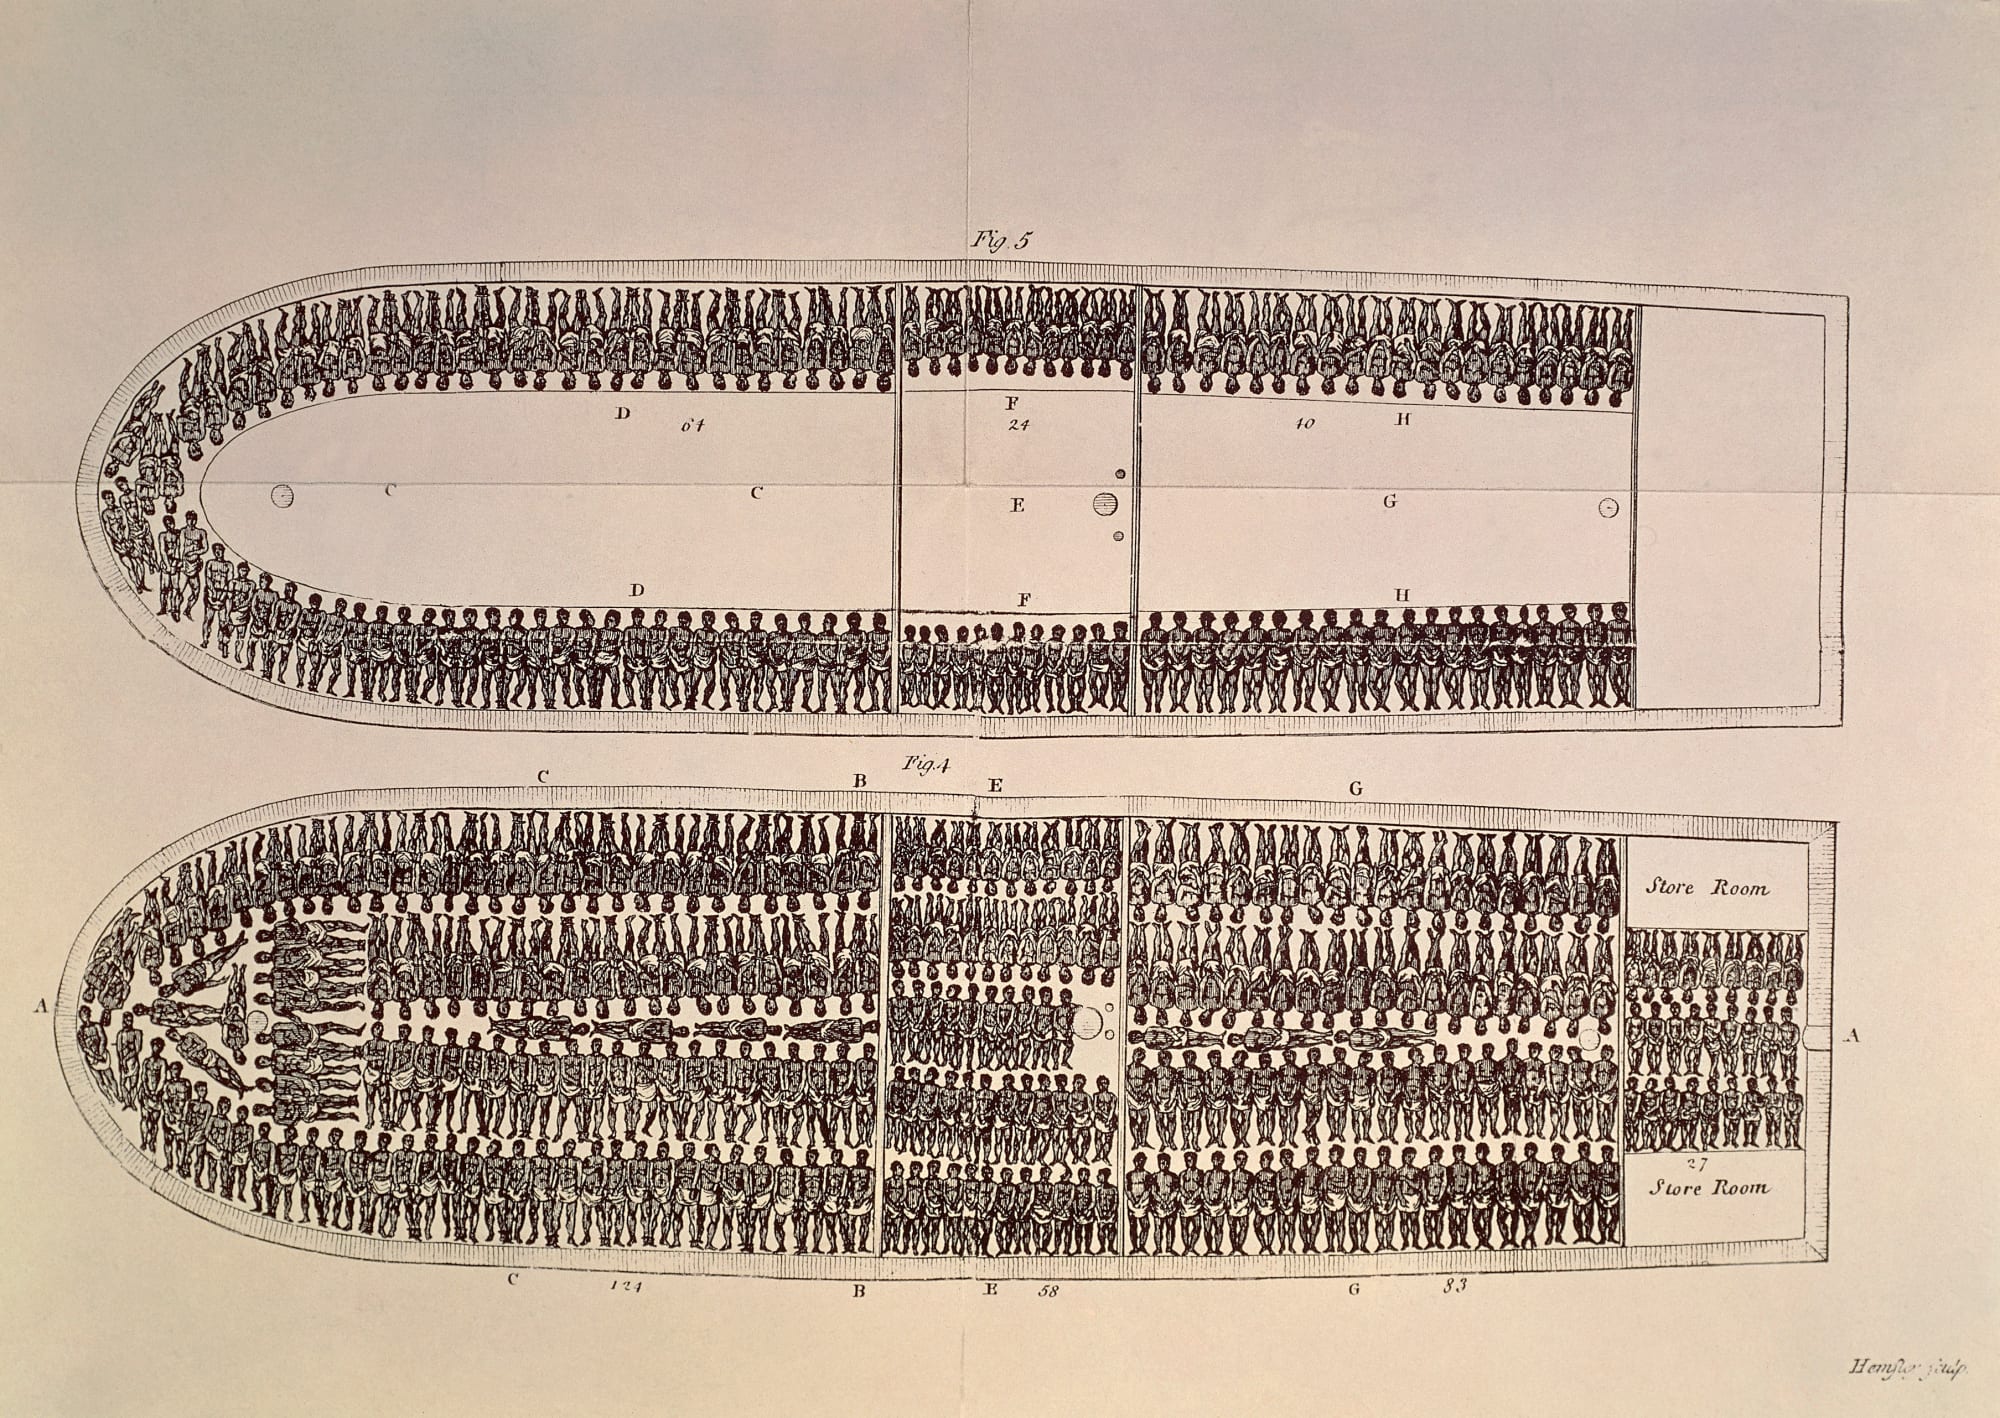 packed positioning of enslaved people in the ship